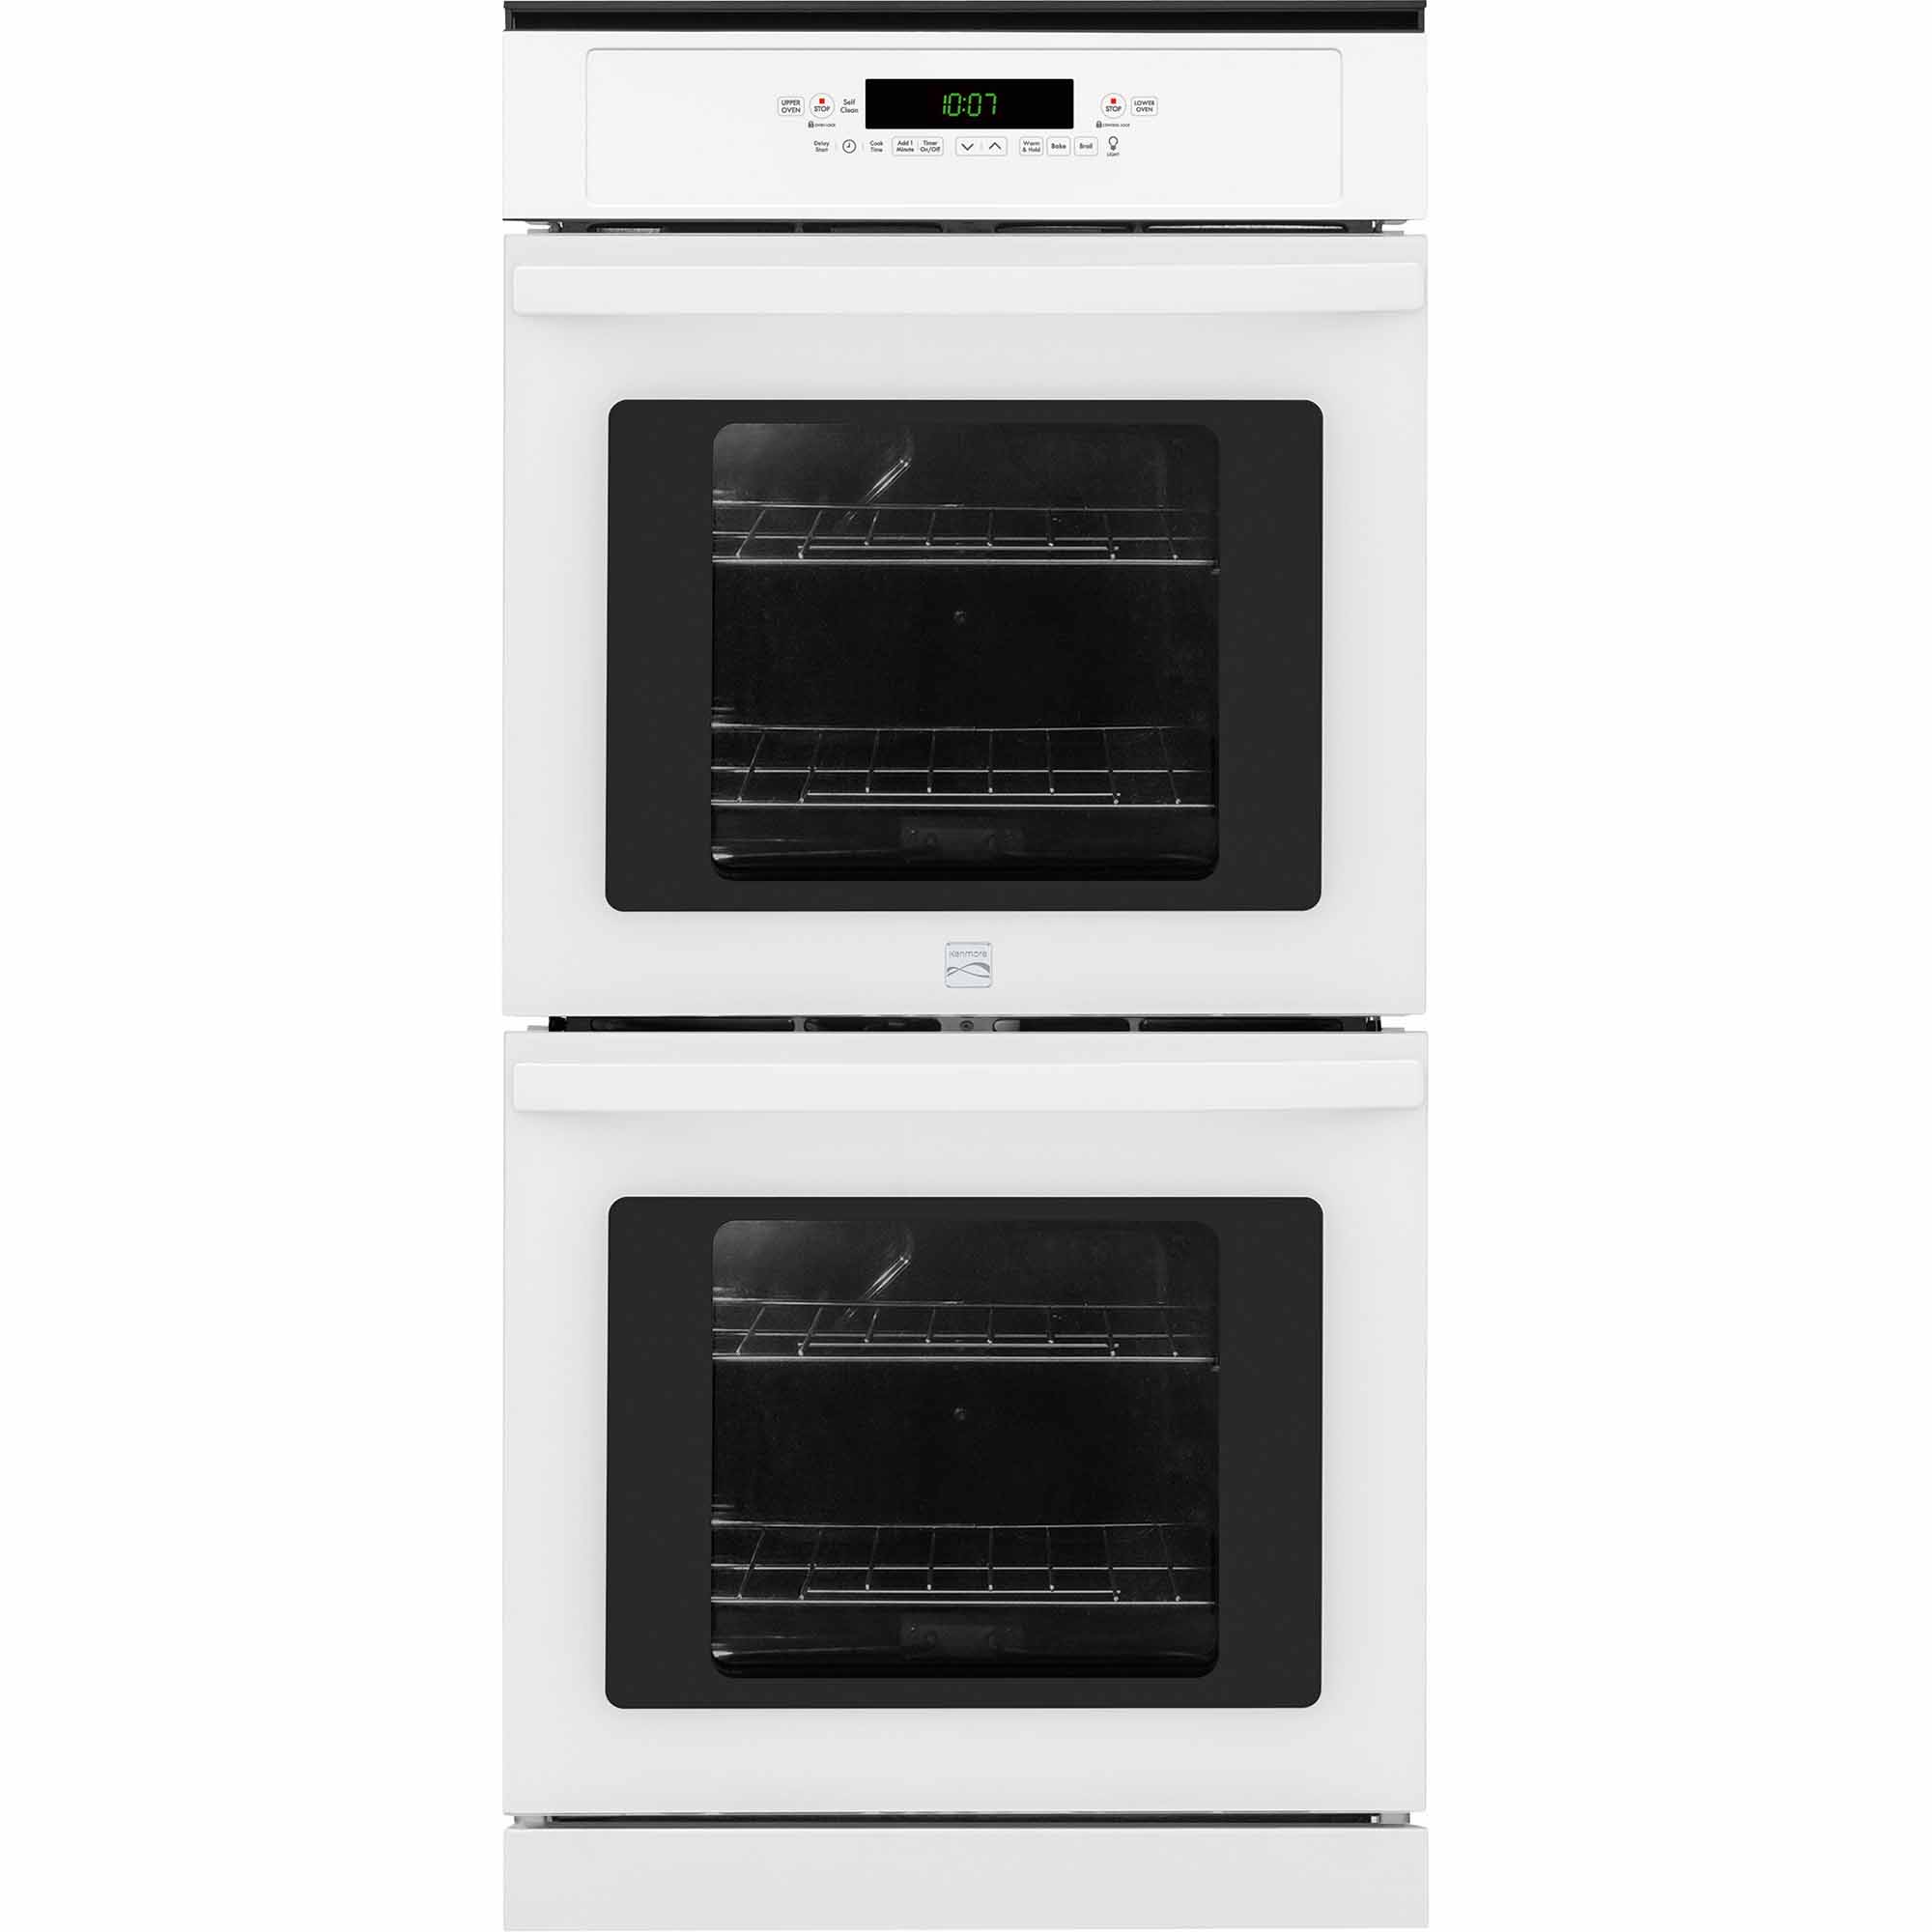 0012505802072 - 40252 24 MANUAL CLEAN ELECTRIC DOUBLE WALL OVEN - WHITE